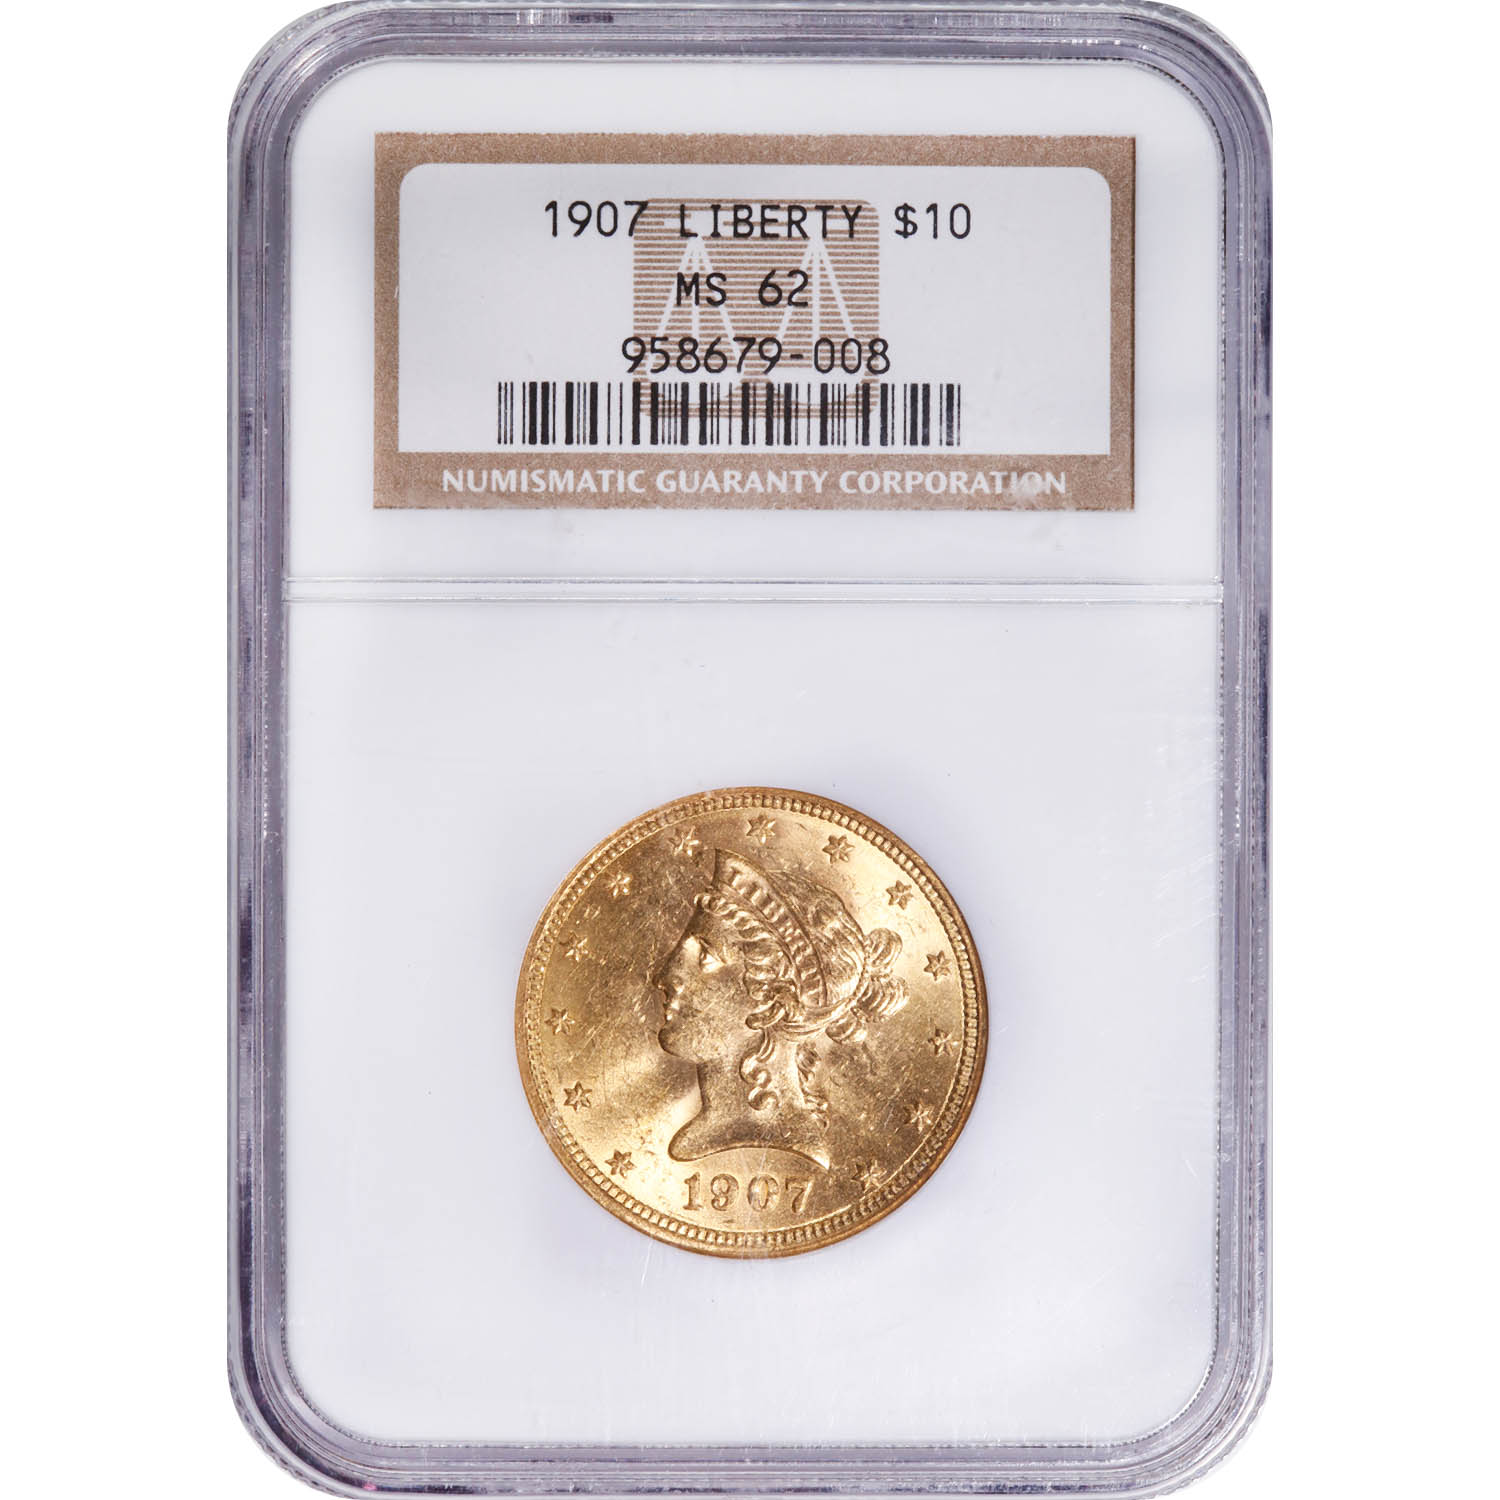 Certified US Gold $10 Liberty 1907 MS62 NGC